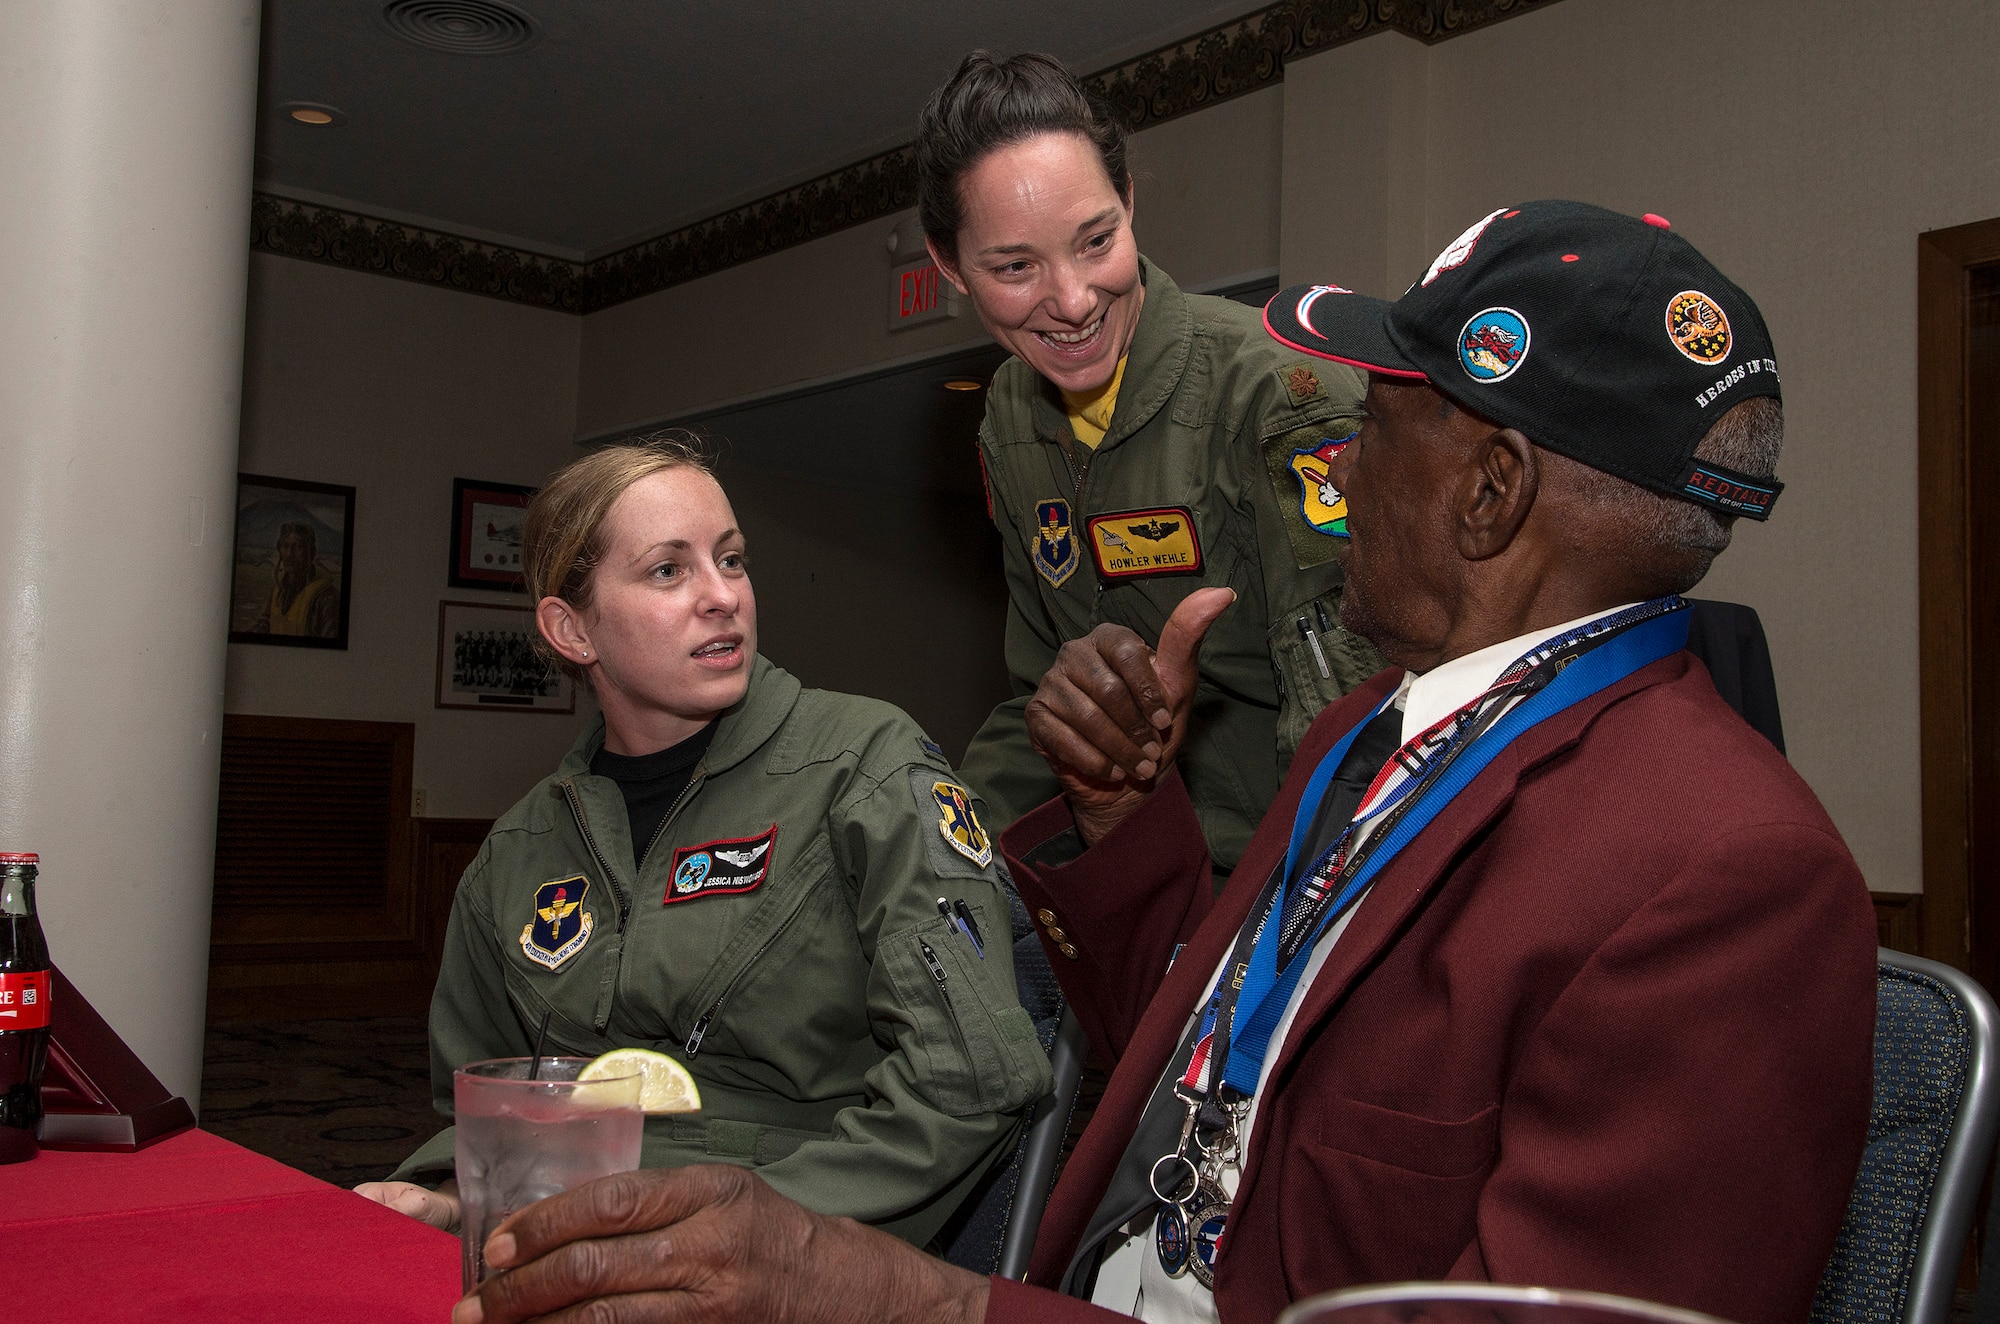 First Lieutenant Jessica Niswonger, 435th Flying Training Squadron, and Maj. Kristen Wehle, 451st Flying Training Squadron, visits with Mr. Theodore Johnson, documented original Tuskegee Airmen, during the Tuskegee Airmen Tribute, June 12, 2015, at Joint Base San Antonio-Randolph’s Parr Club. Members of the JBSA-Randolph community celebrated the legacy of the first all-black unit by paying tribute to seven of the documented original Tuskegee Airmen members. The Tuskegee Airmen distinguished themselves during World War II with more than 15,500 sorties and 1,500 missions in Europe and North Africa and earned numerous combat awards. The event featured musical entertainment, comments by 12th Flying Training Wing leaders, an introduction of four Tuskegee Airmen present and a presentation of gifts to them. Members of the audience had an opportunity to mingle with the Tuskegee Airmen and listen to their stories. (U.S. Air Force photo by Johnny Saldivar)